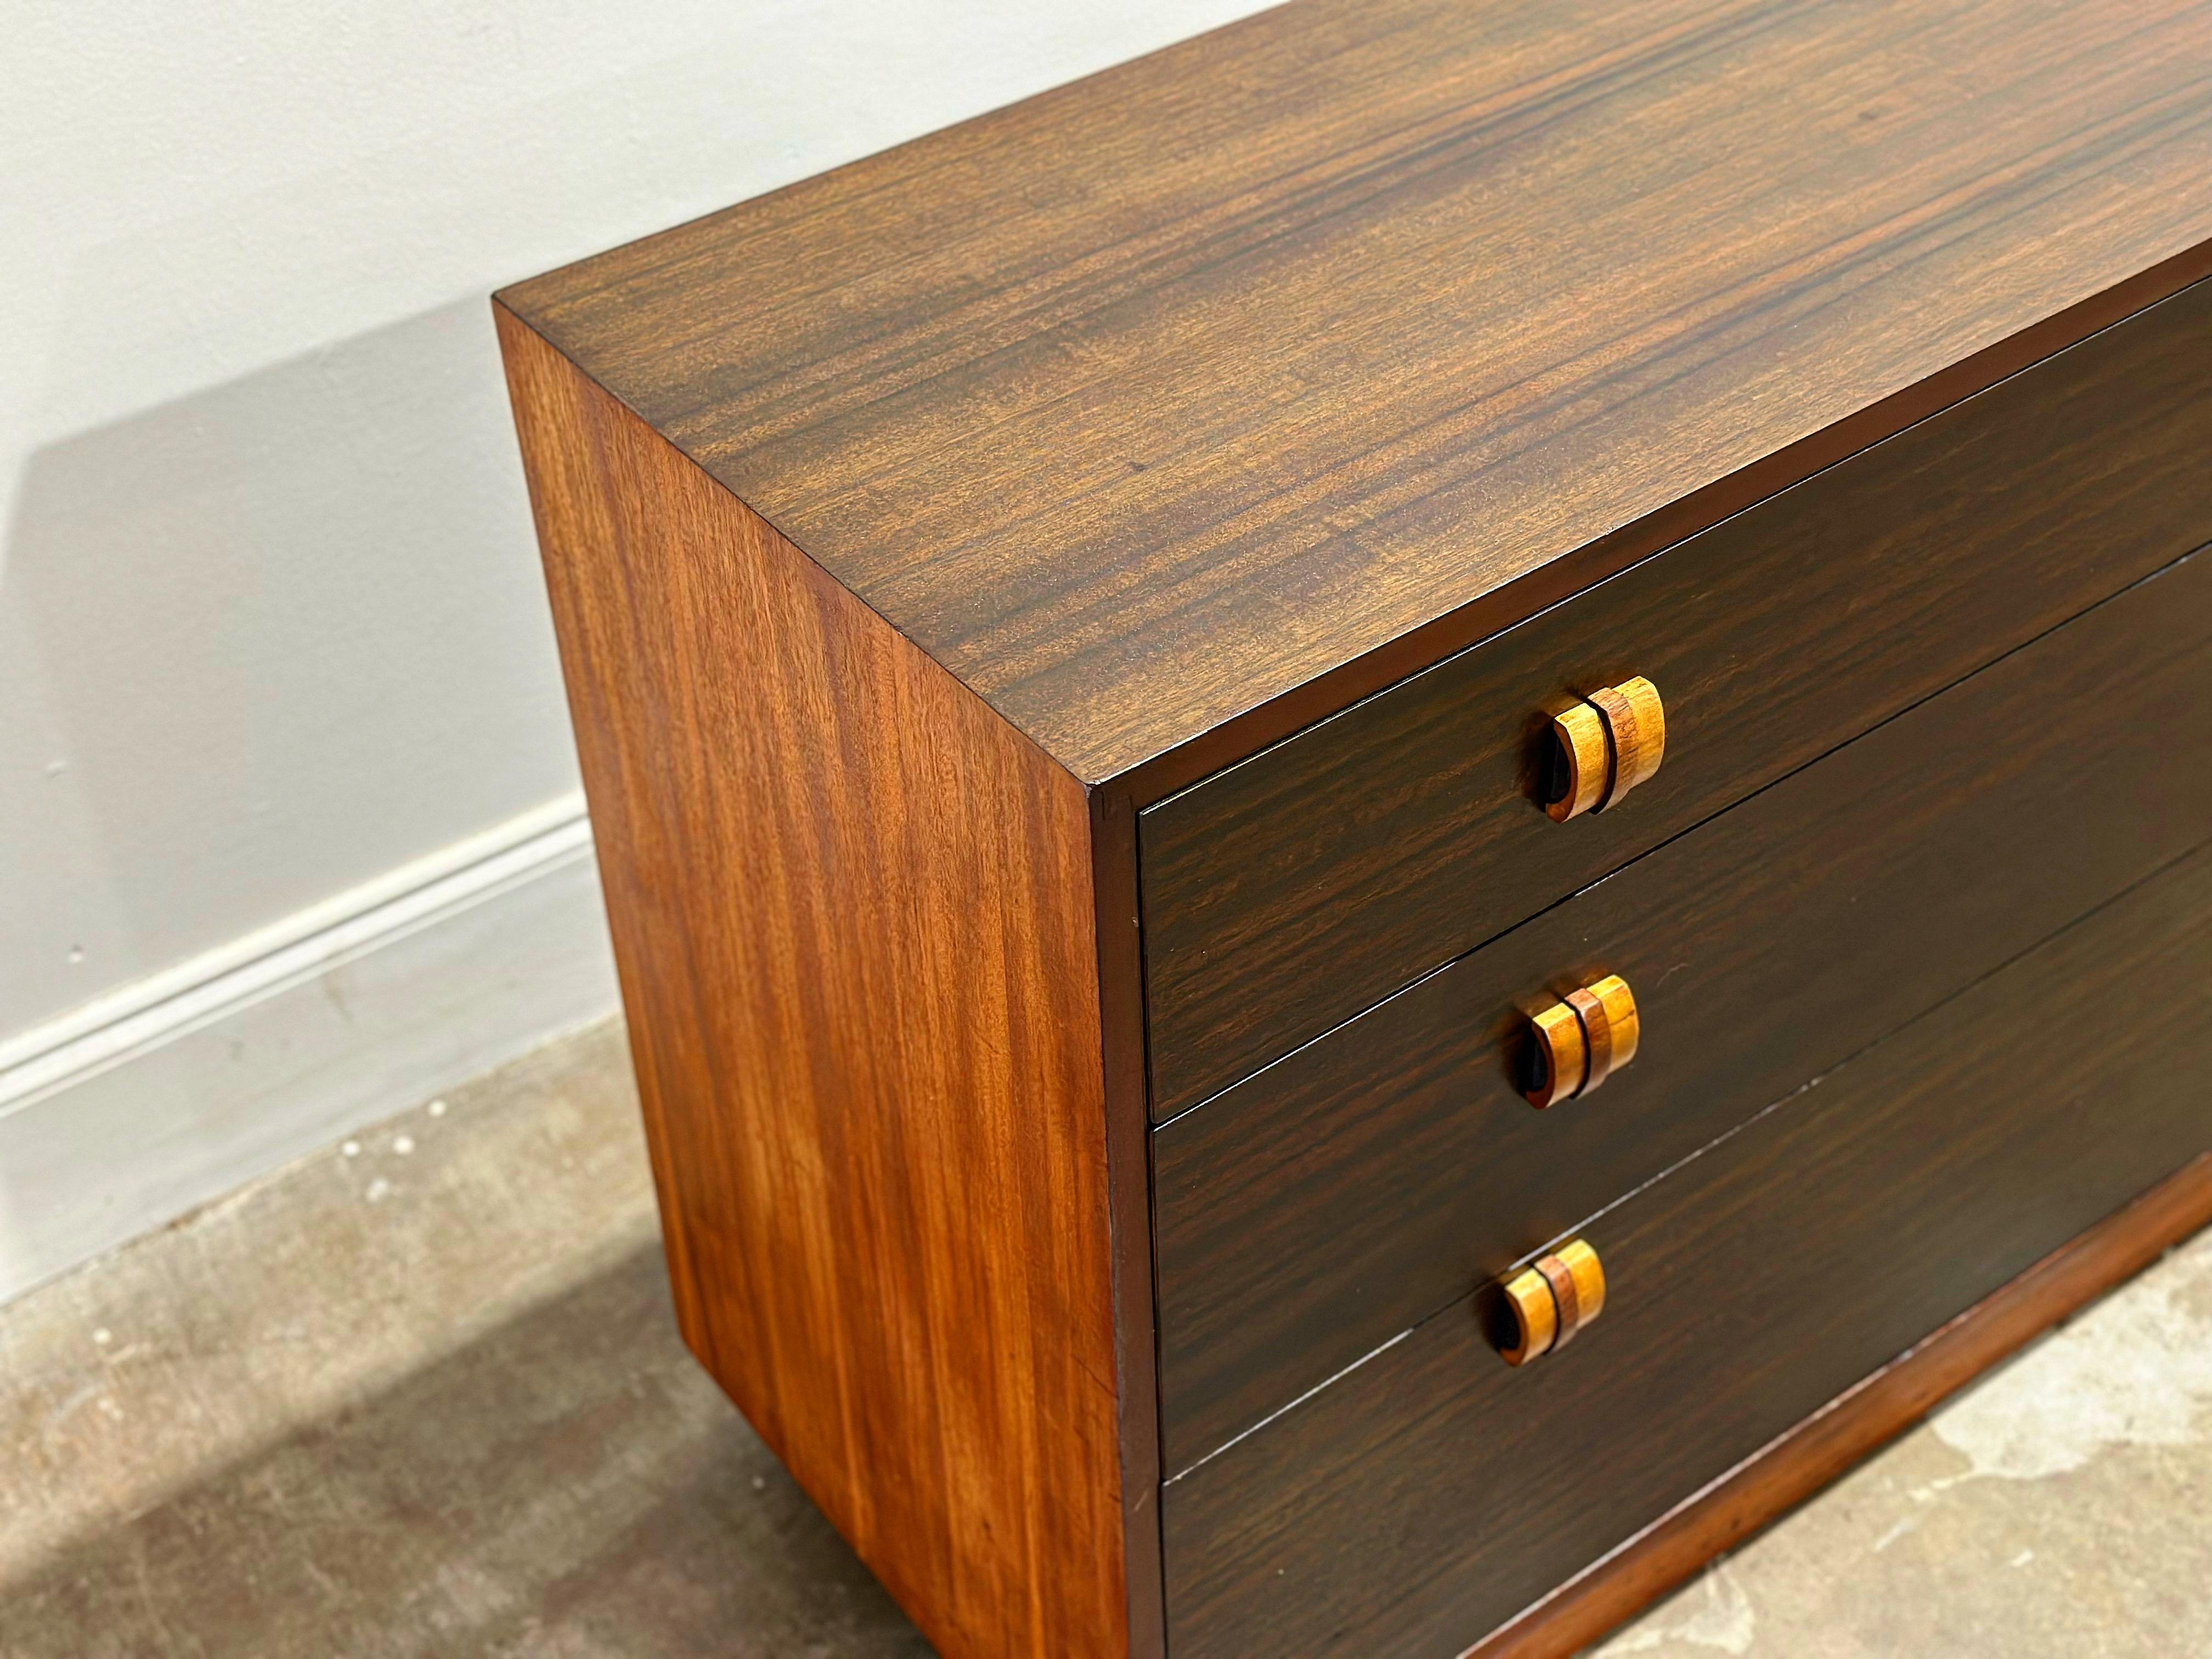 Rare Streamlined Moderne/Art Deco chest of drawers by Gilbert Rohde for Cavalier Furniture circa mid/late 1940s. Perfect juxtaposition of woods - afromasia case with a wenge top and drawer facades. Solid birch plinth base with sculpted afromasia and